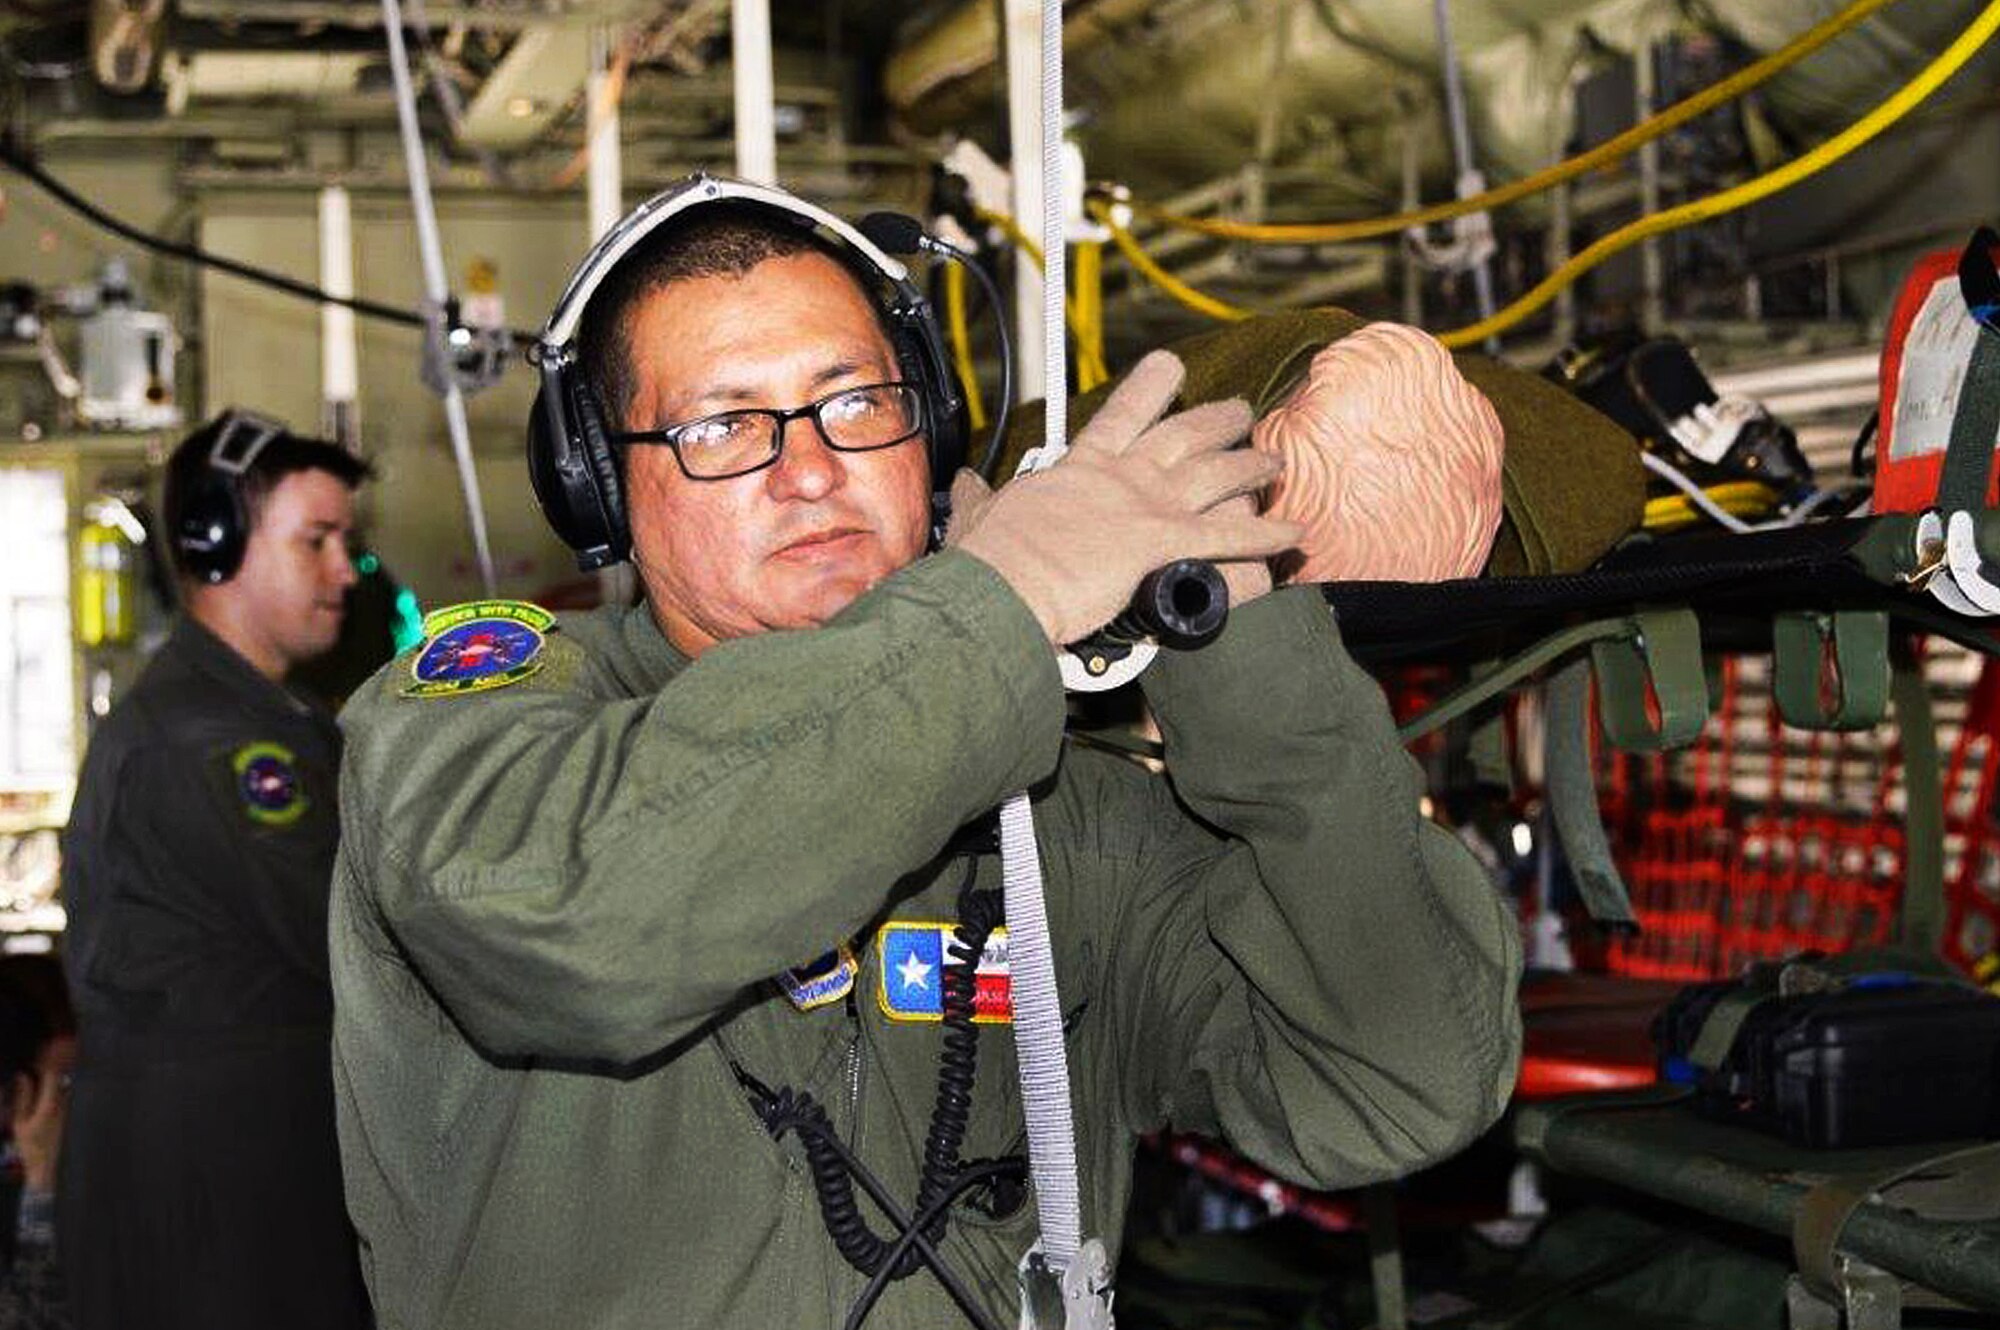 Tech. Sgt. Carlos Alaniz, 433rd Aeromedical Evacuation Squadron, flight medical technician, loads a simulated patient onto a C-130J Hercules April 29, 2017 during exercise Patriot Hook at Vandenberg Air Force Base, California. Patriot Hook is an annual joint-service exercise coordinated by the Air Force Reserve, designed to integrate the military and first responders of federal, state and local agencies by providing training to mobilize quickly and deploying in military aircraft in the event of a regional emergency or natural disaster.  (U.S. Air Force photo by Minnie Jones